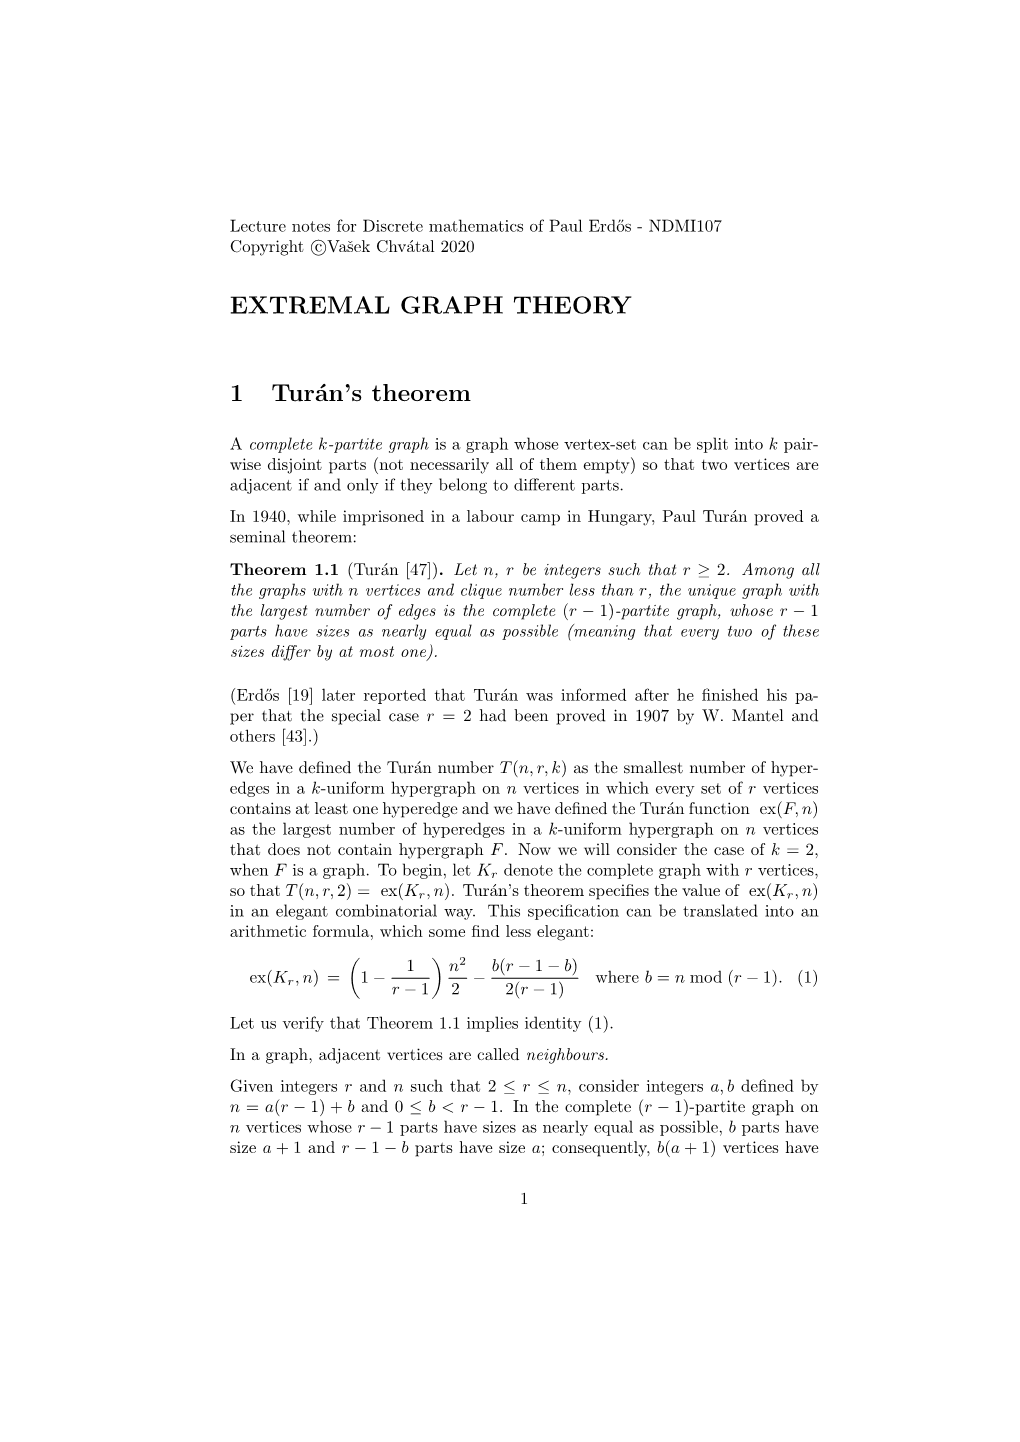 EXTREMAL GRAPH THEORY 1 Turán's Theorem